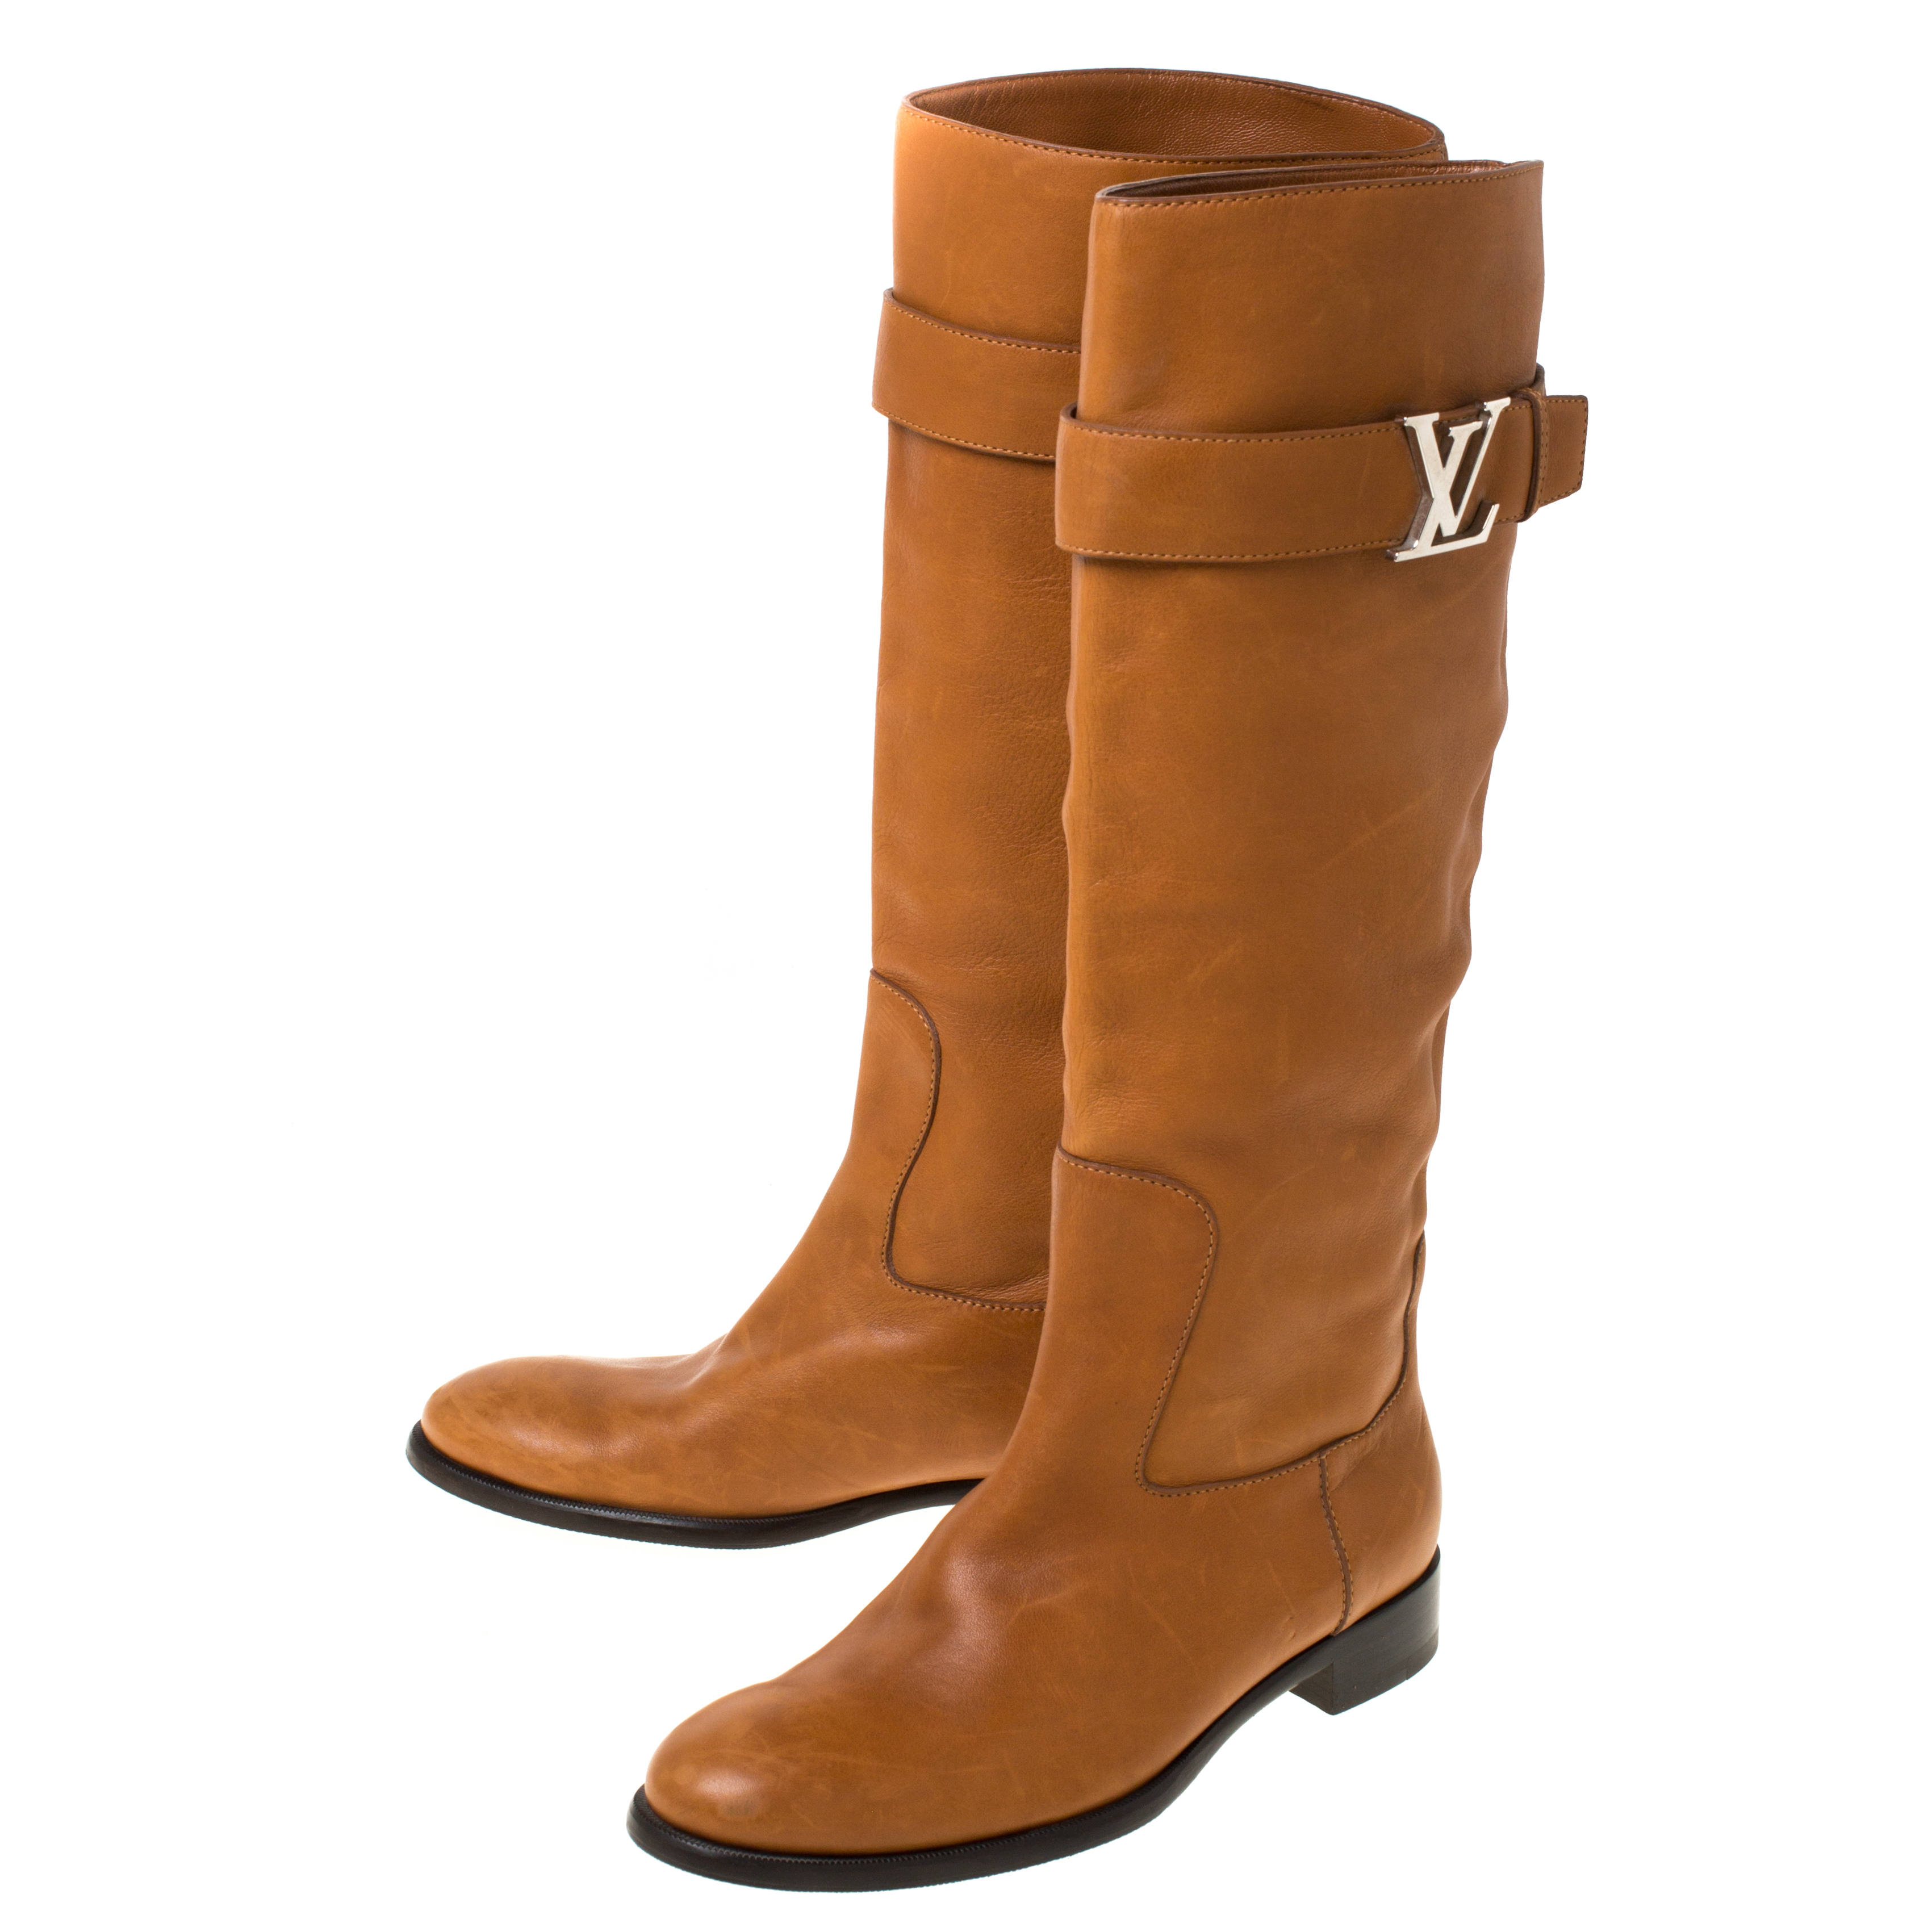 Héritage leather riding boots Louis Vuitton Brown size 40.5 EU in